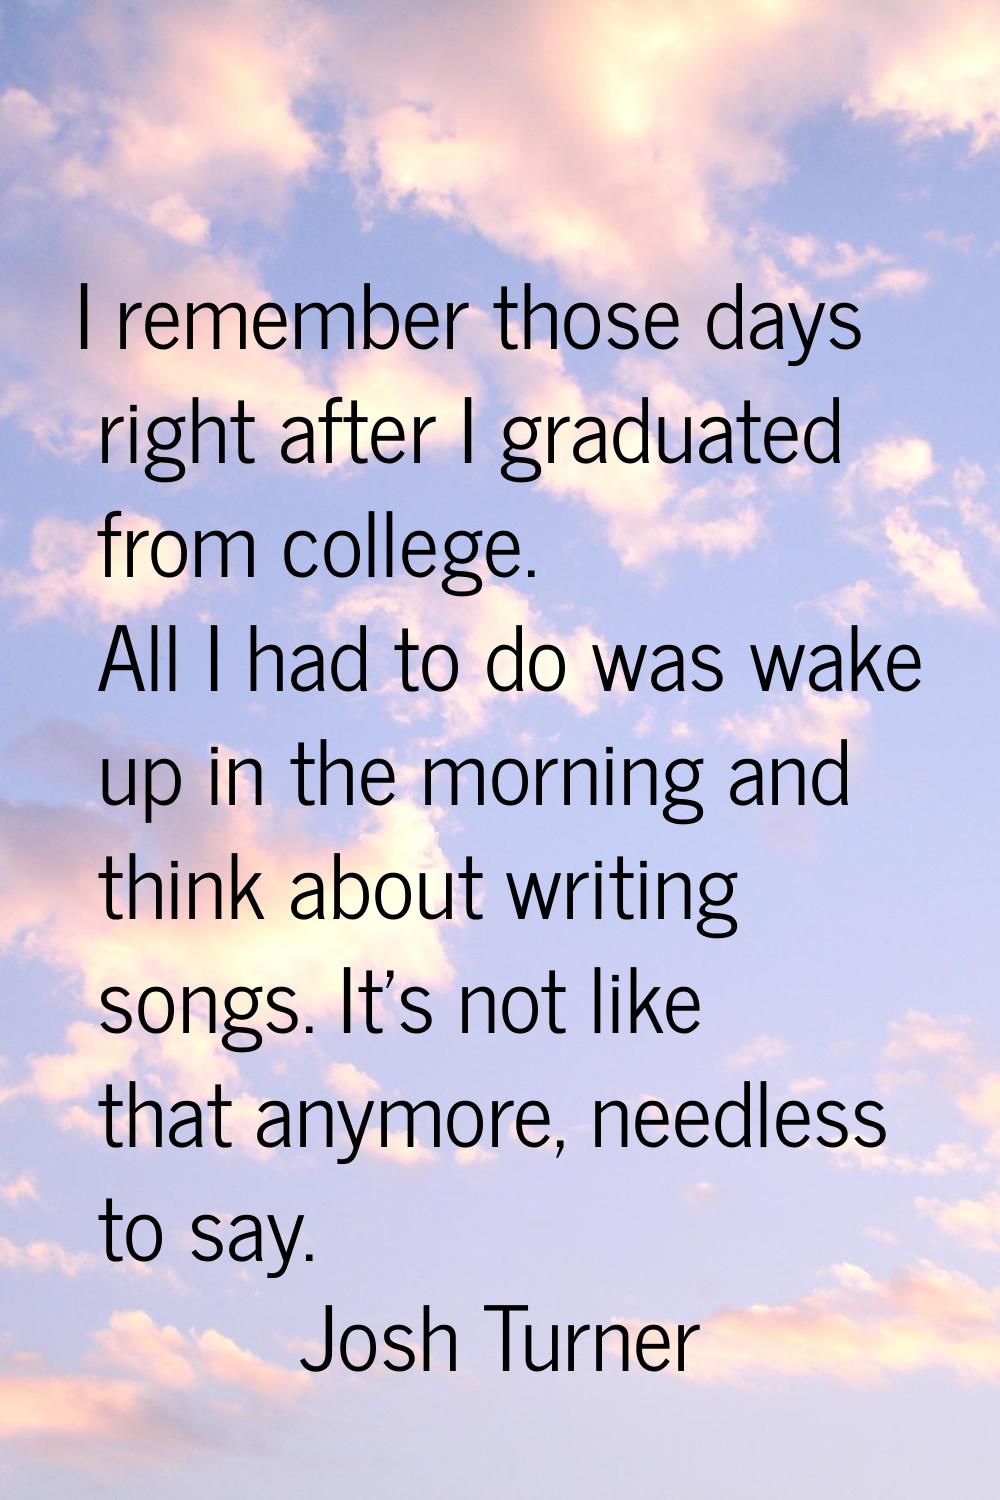 I remember those days right after I graduated from college. All I had to do was wake up in the morn